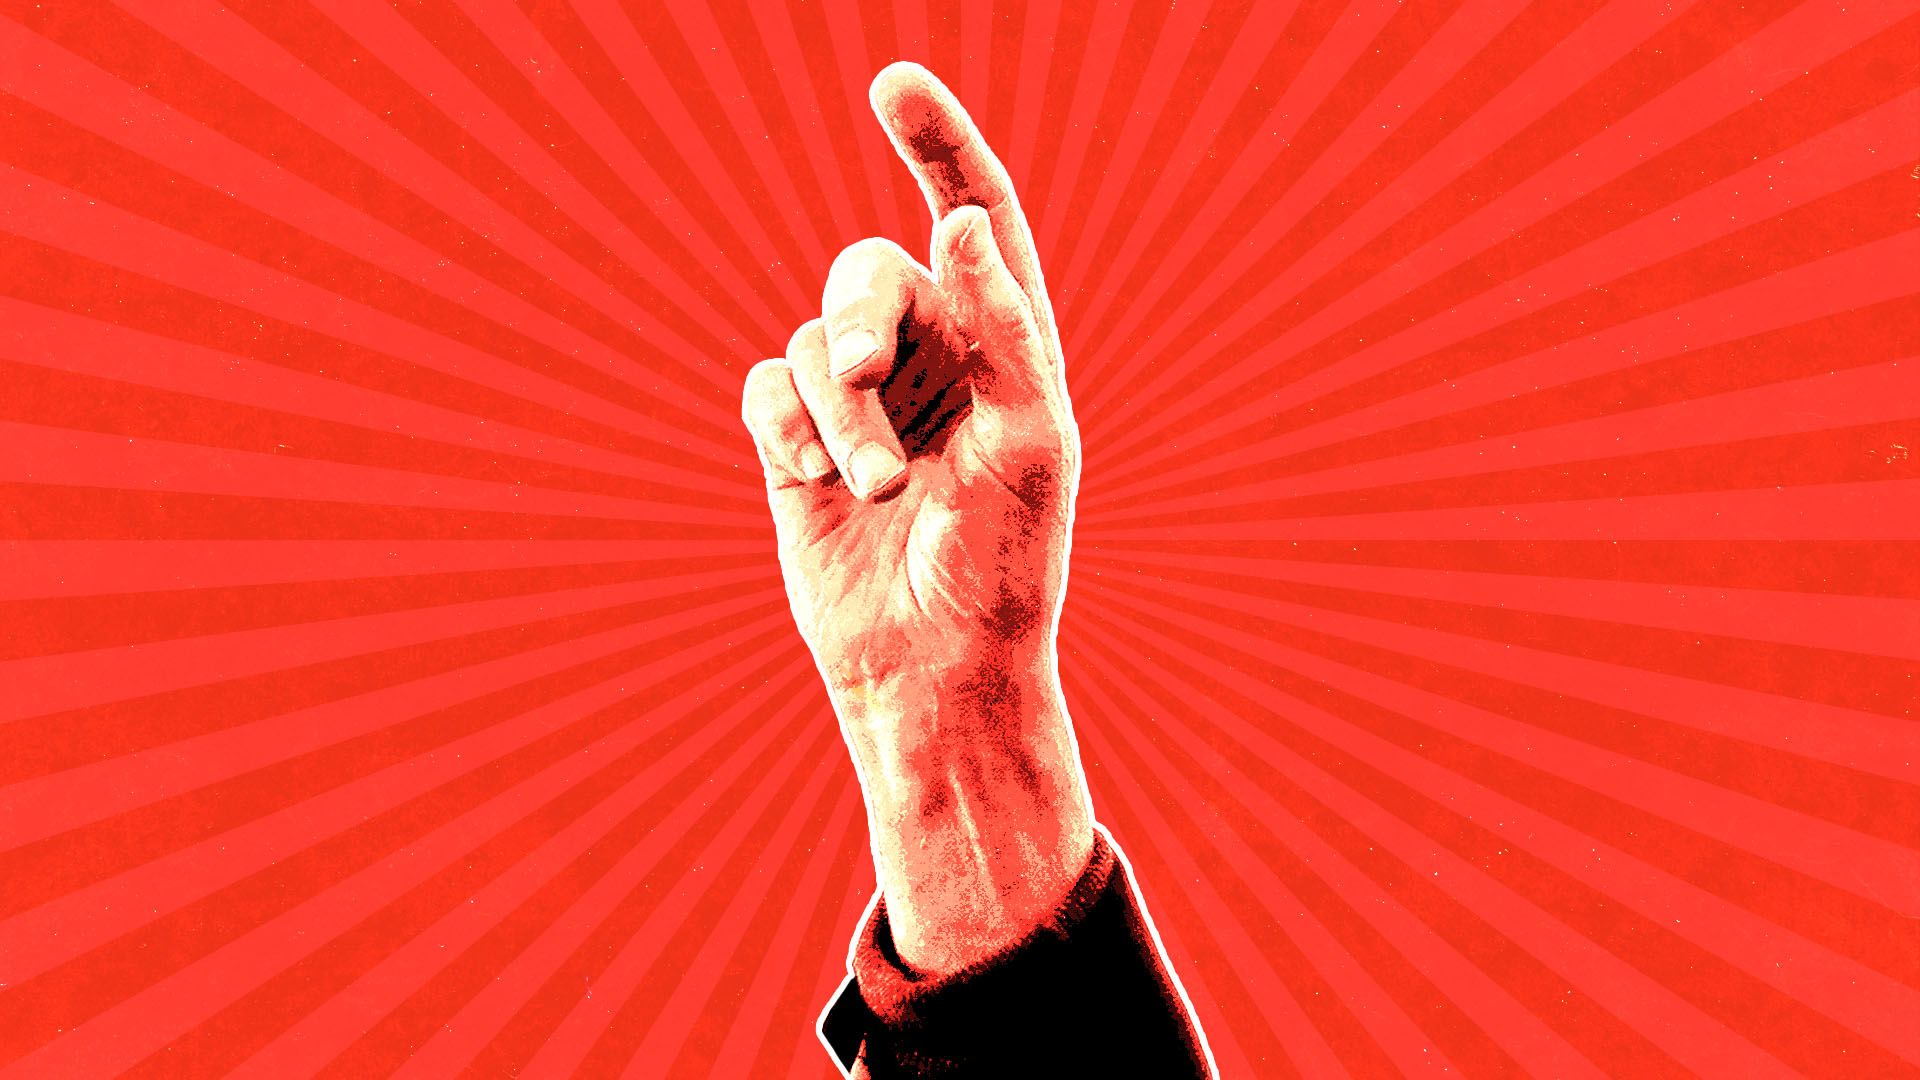 Illustration of Bernie making a familiar hand gesture of his in the style of a socialist-style closed fist poster